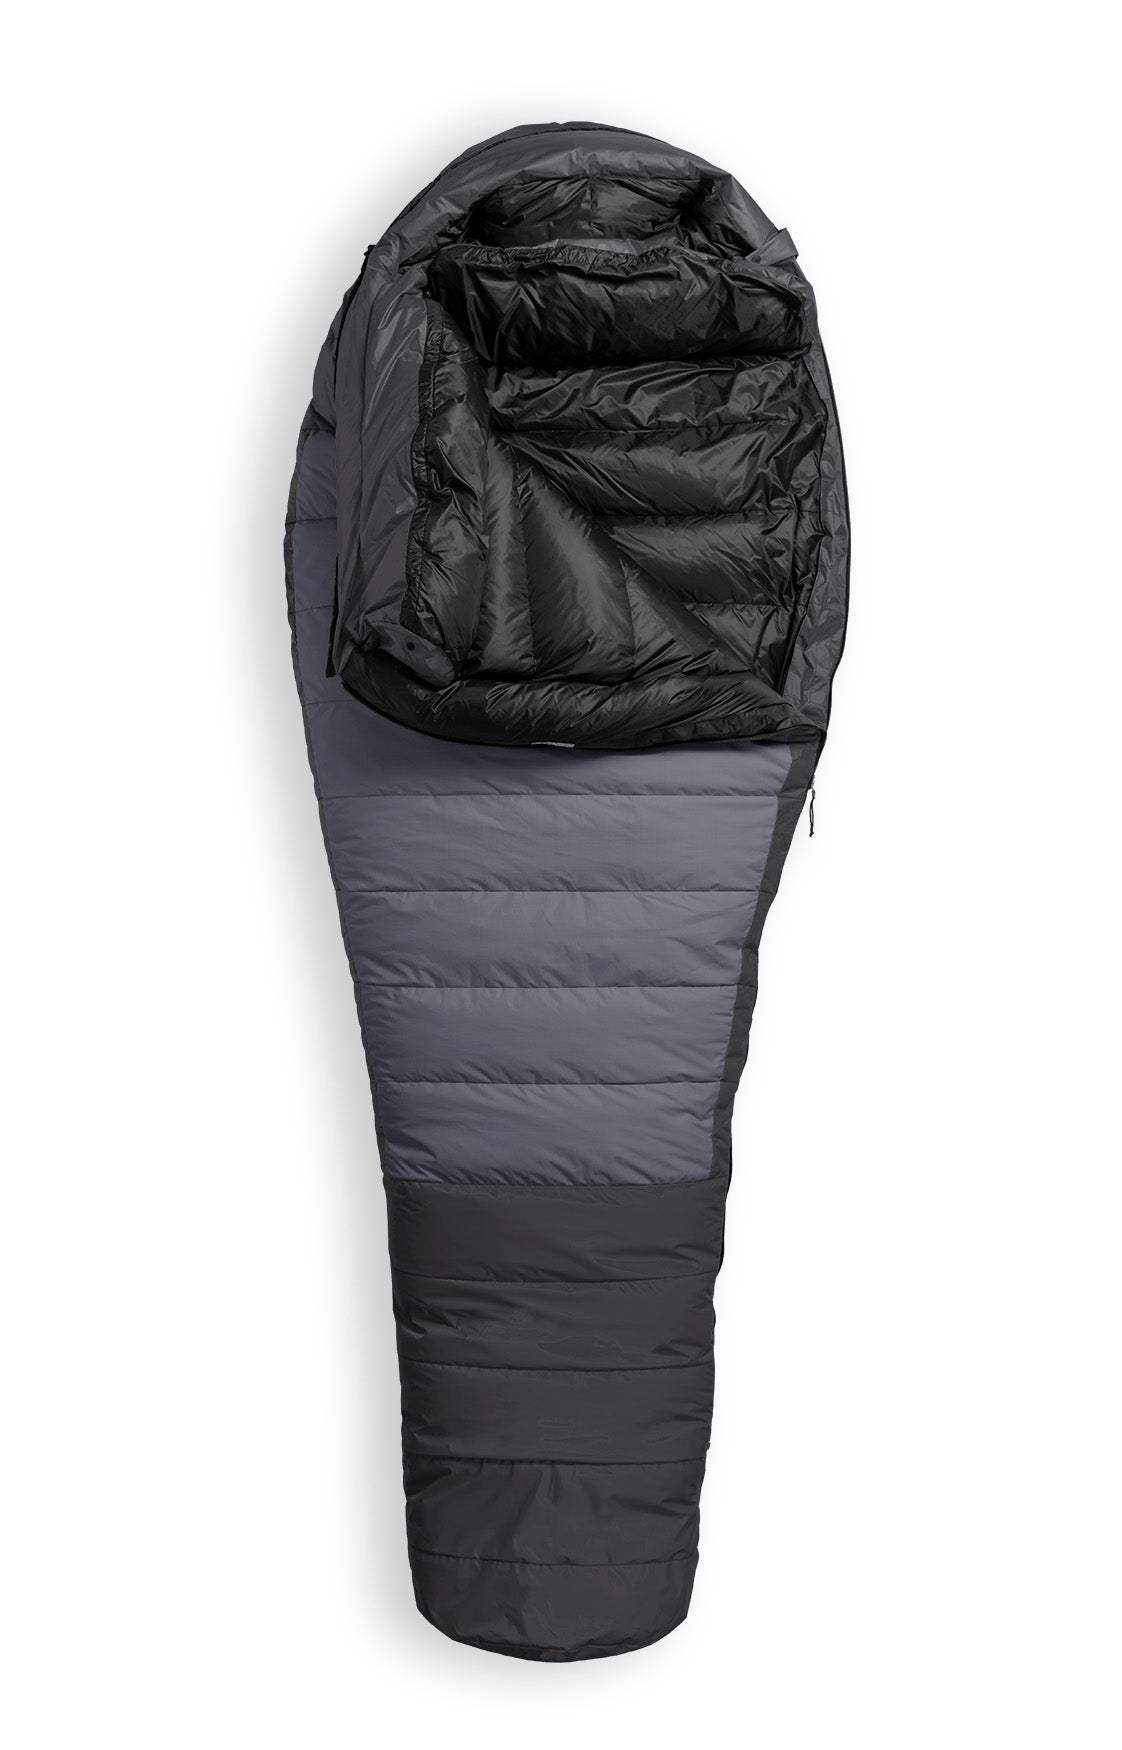 Eddie Bauer's Down Jacket Sleeping Bag Hybrid Might Be Crazy — But It's  Brilliant, Too